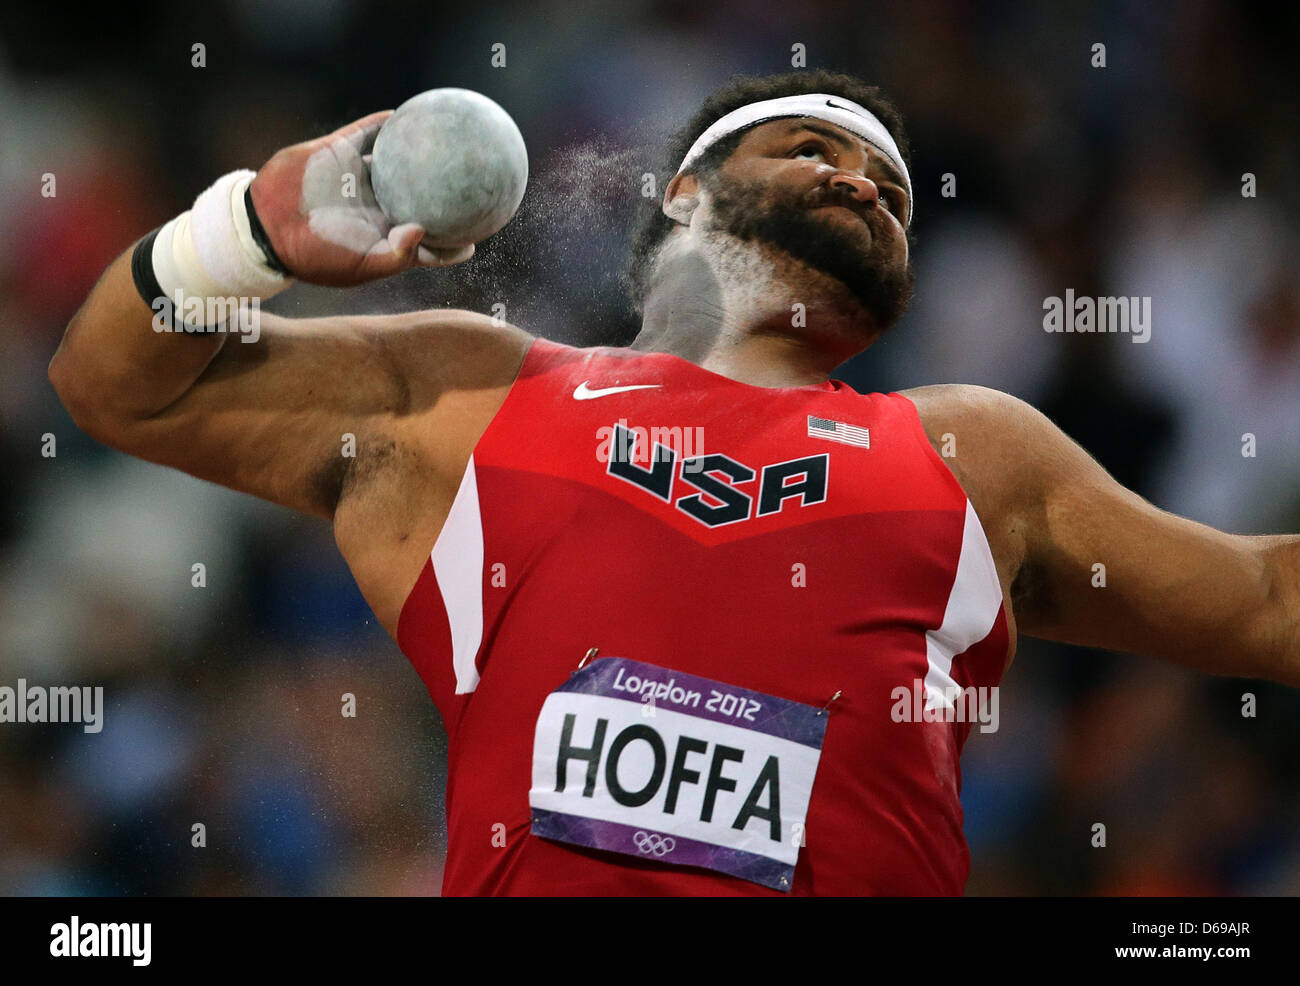 Reese Hoffa Of The Usa Competes During The Men S Shot Put Final For The London 2012 Olympic Games Athletics Track And Field Events At The Olympic Stadium London Great Britain 03 August